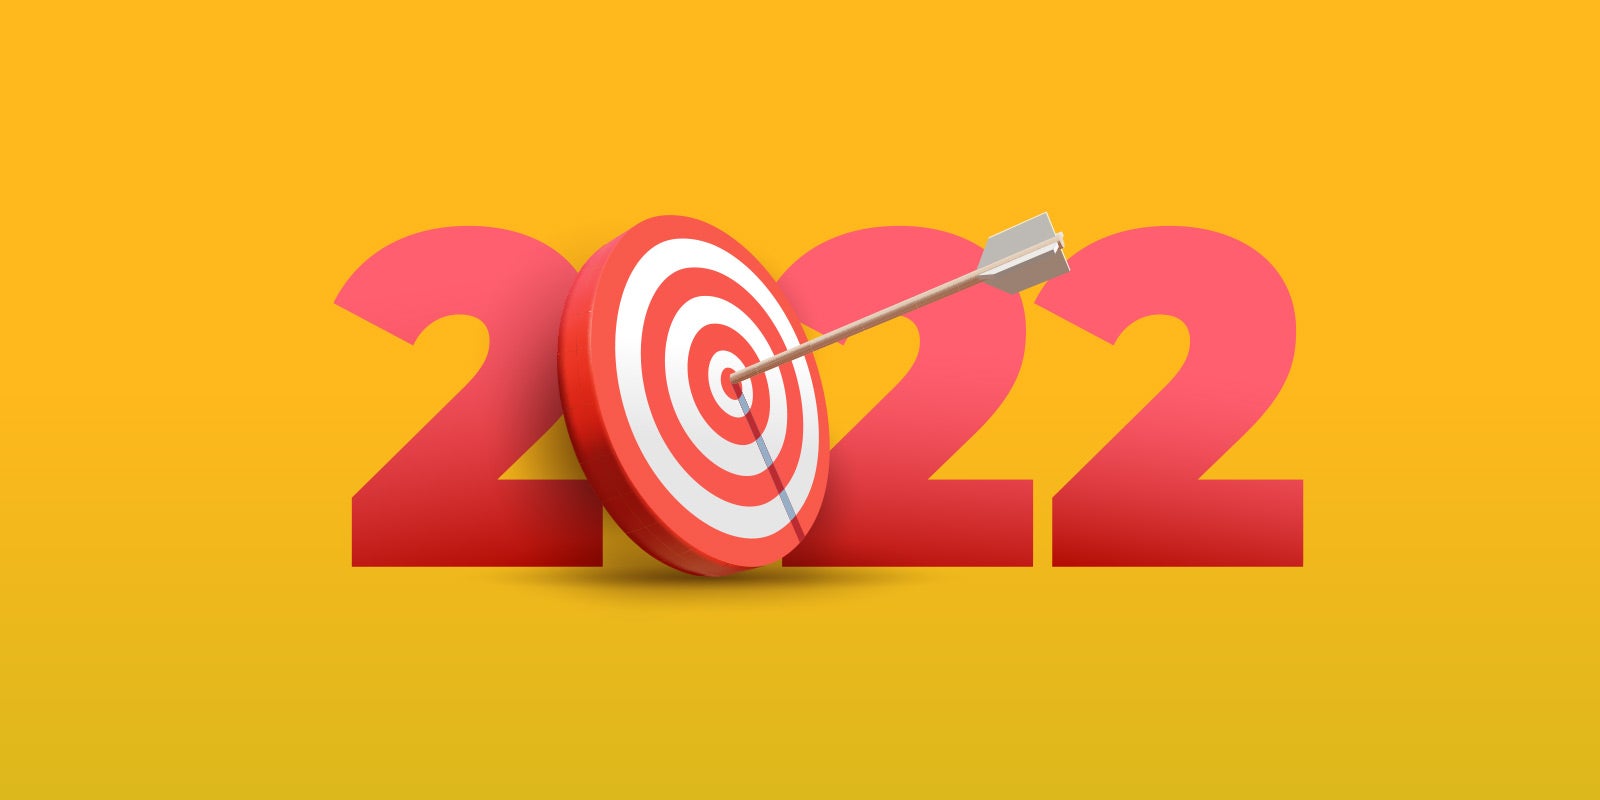 illustration of 2022 with a bullseye hit by an arrow in the 0